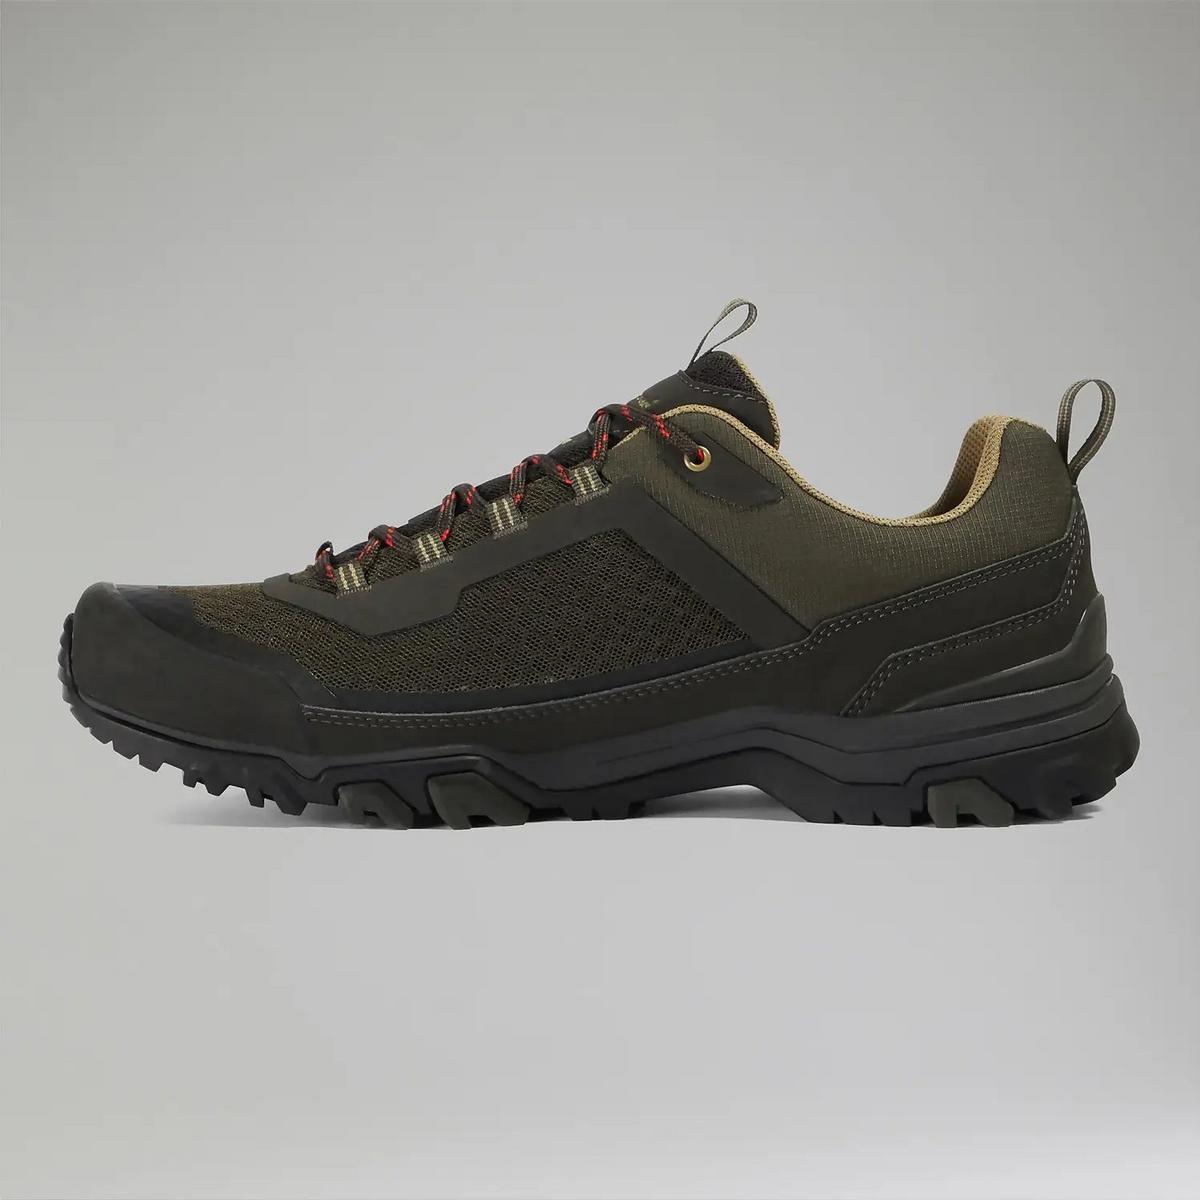 Berghaus Men's Ground Attack Active GORE-TEX Adventure Shoes - Green